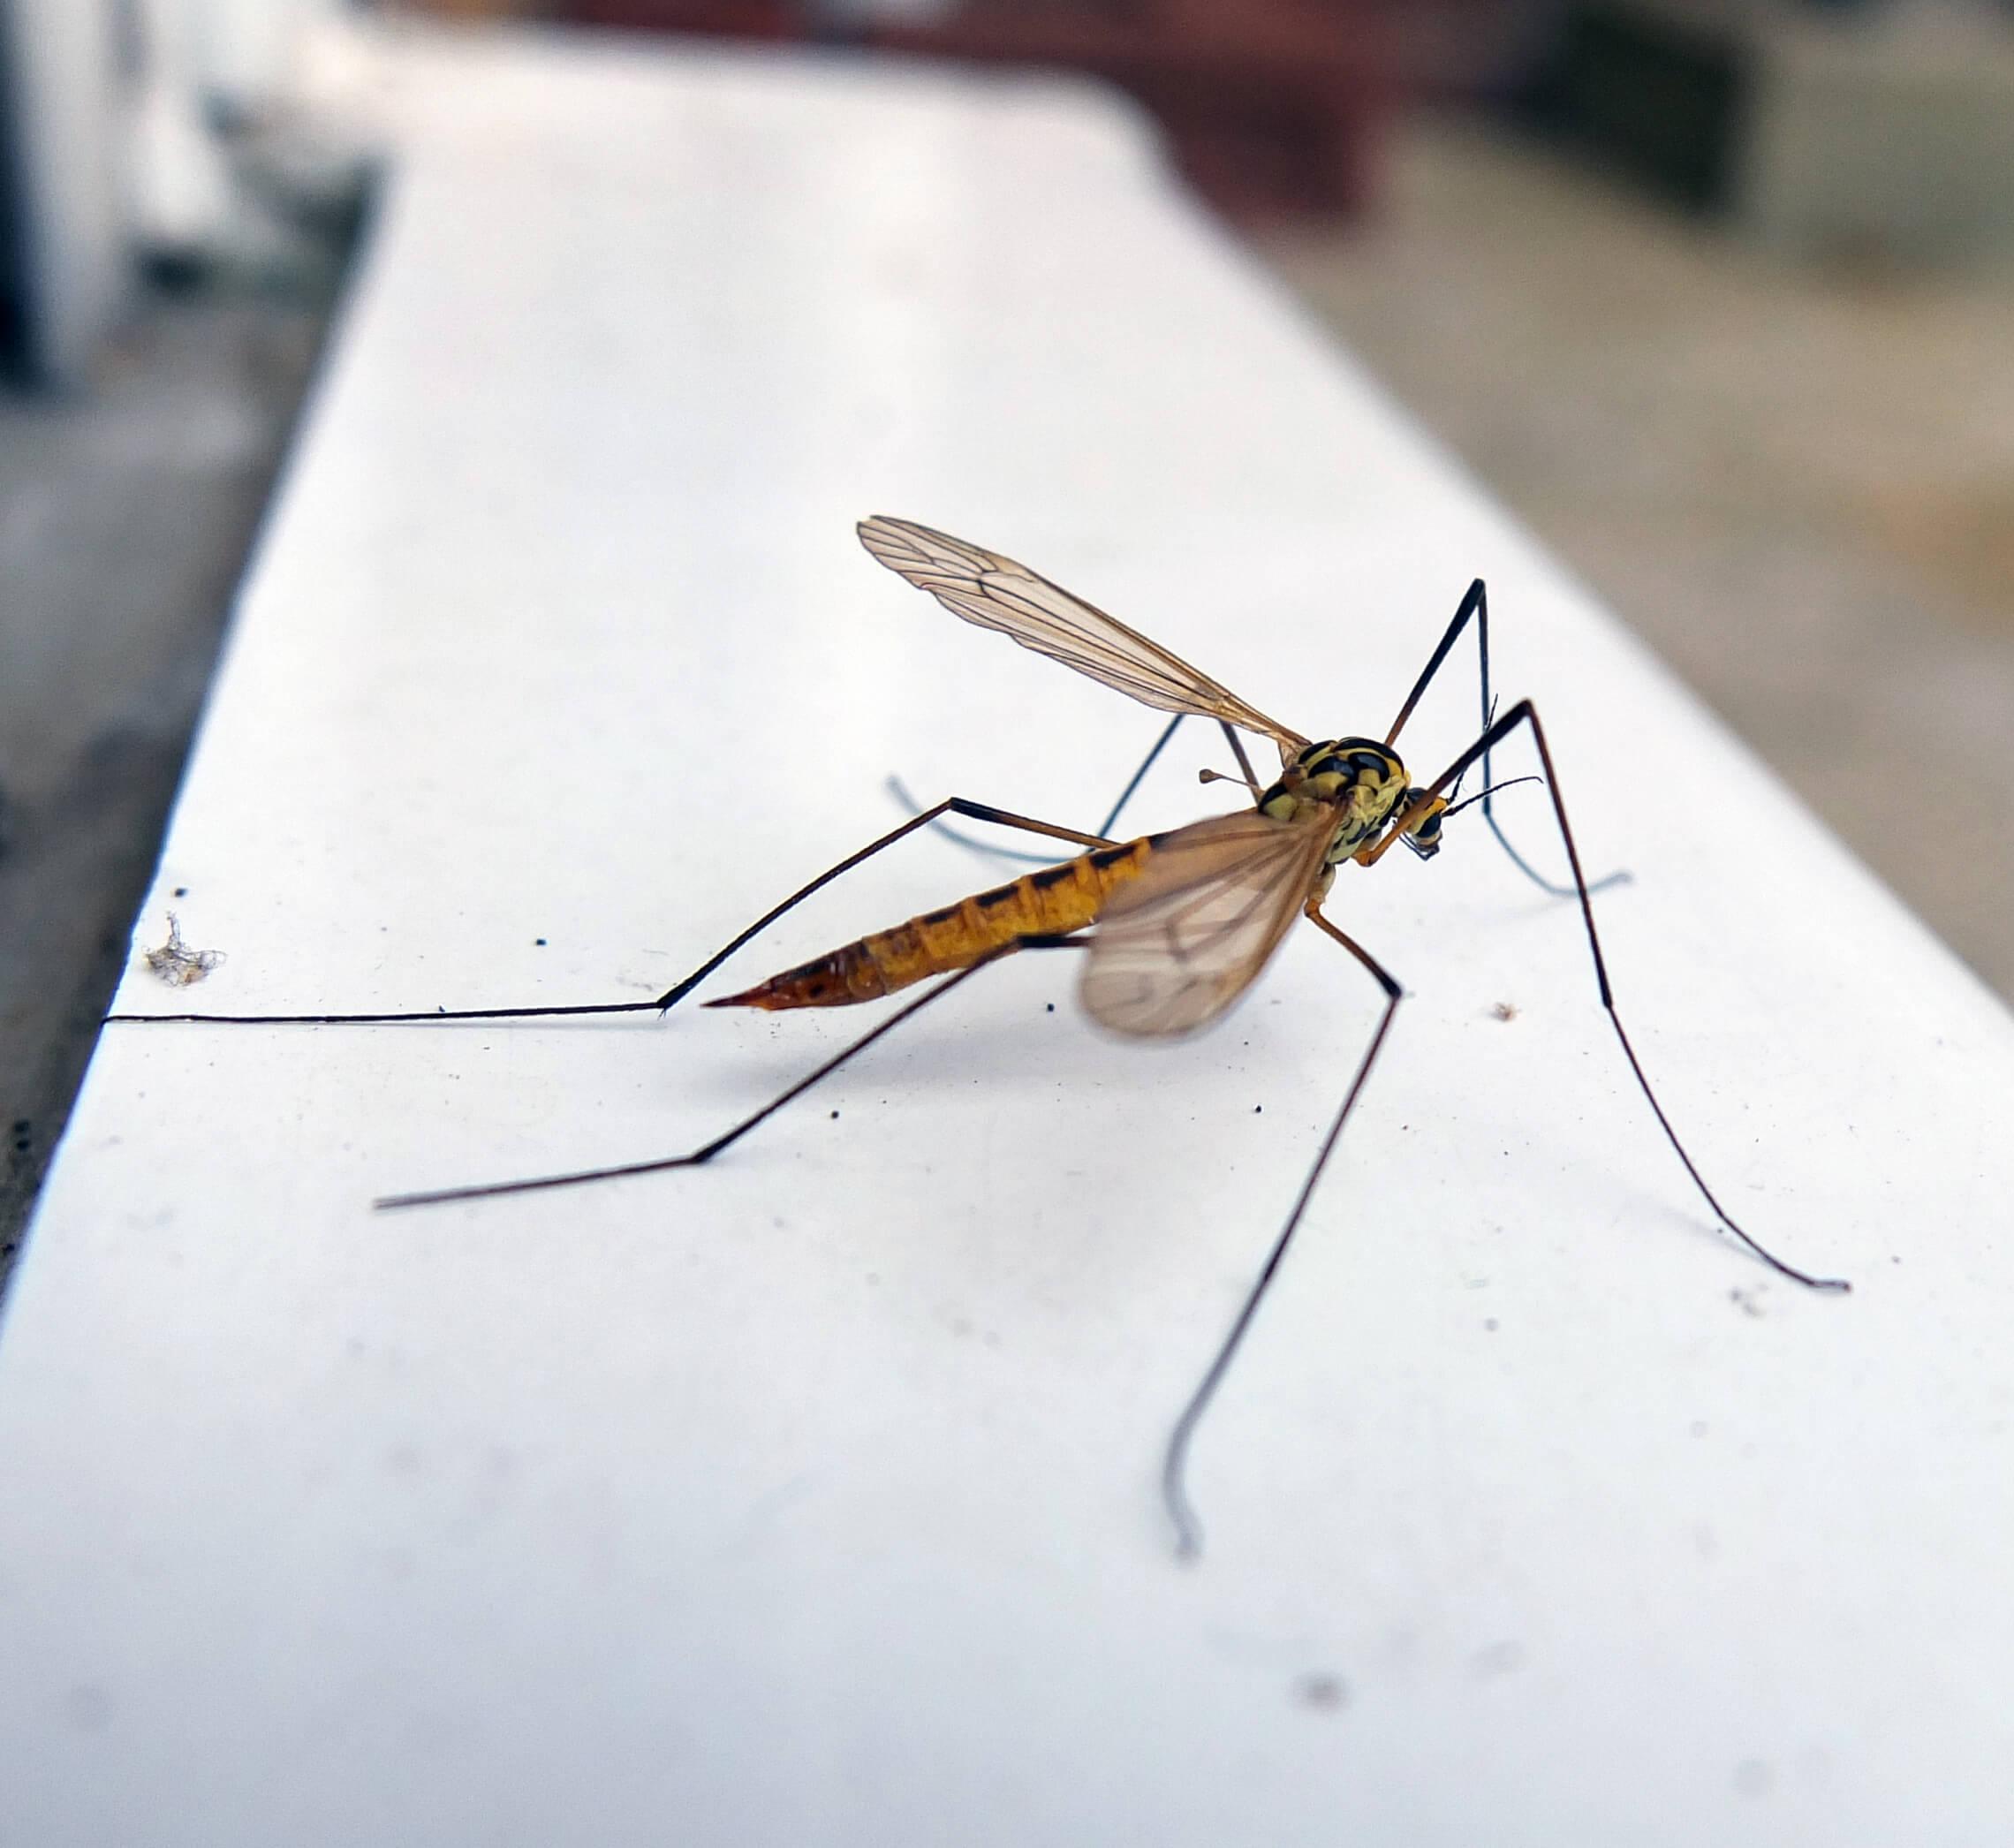 A crane fly perched on a ledge. 